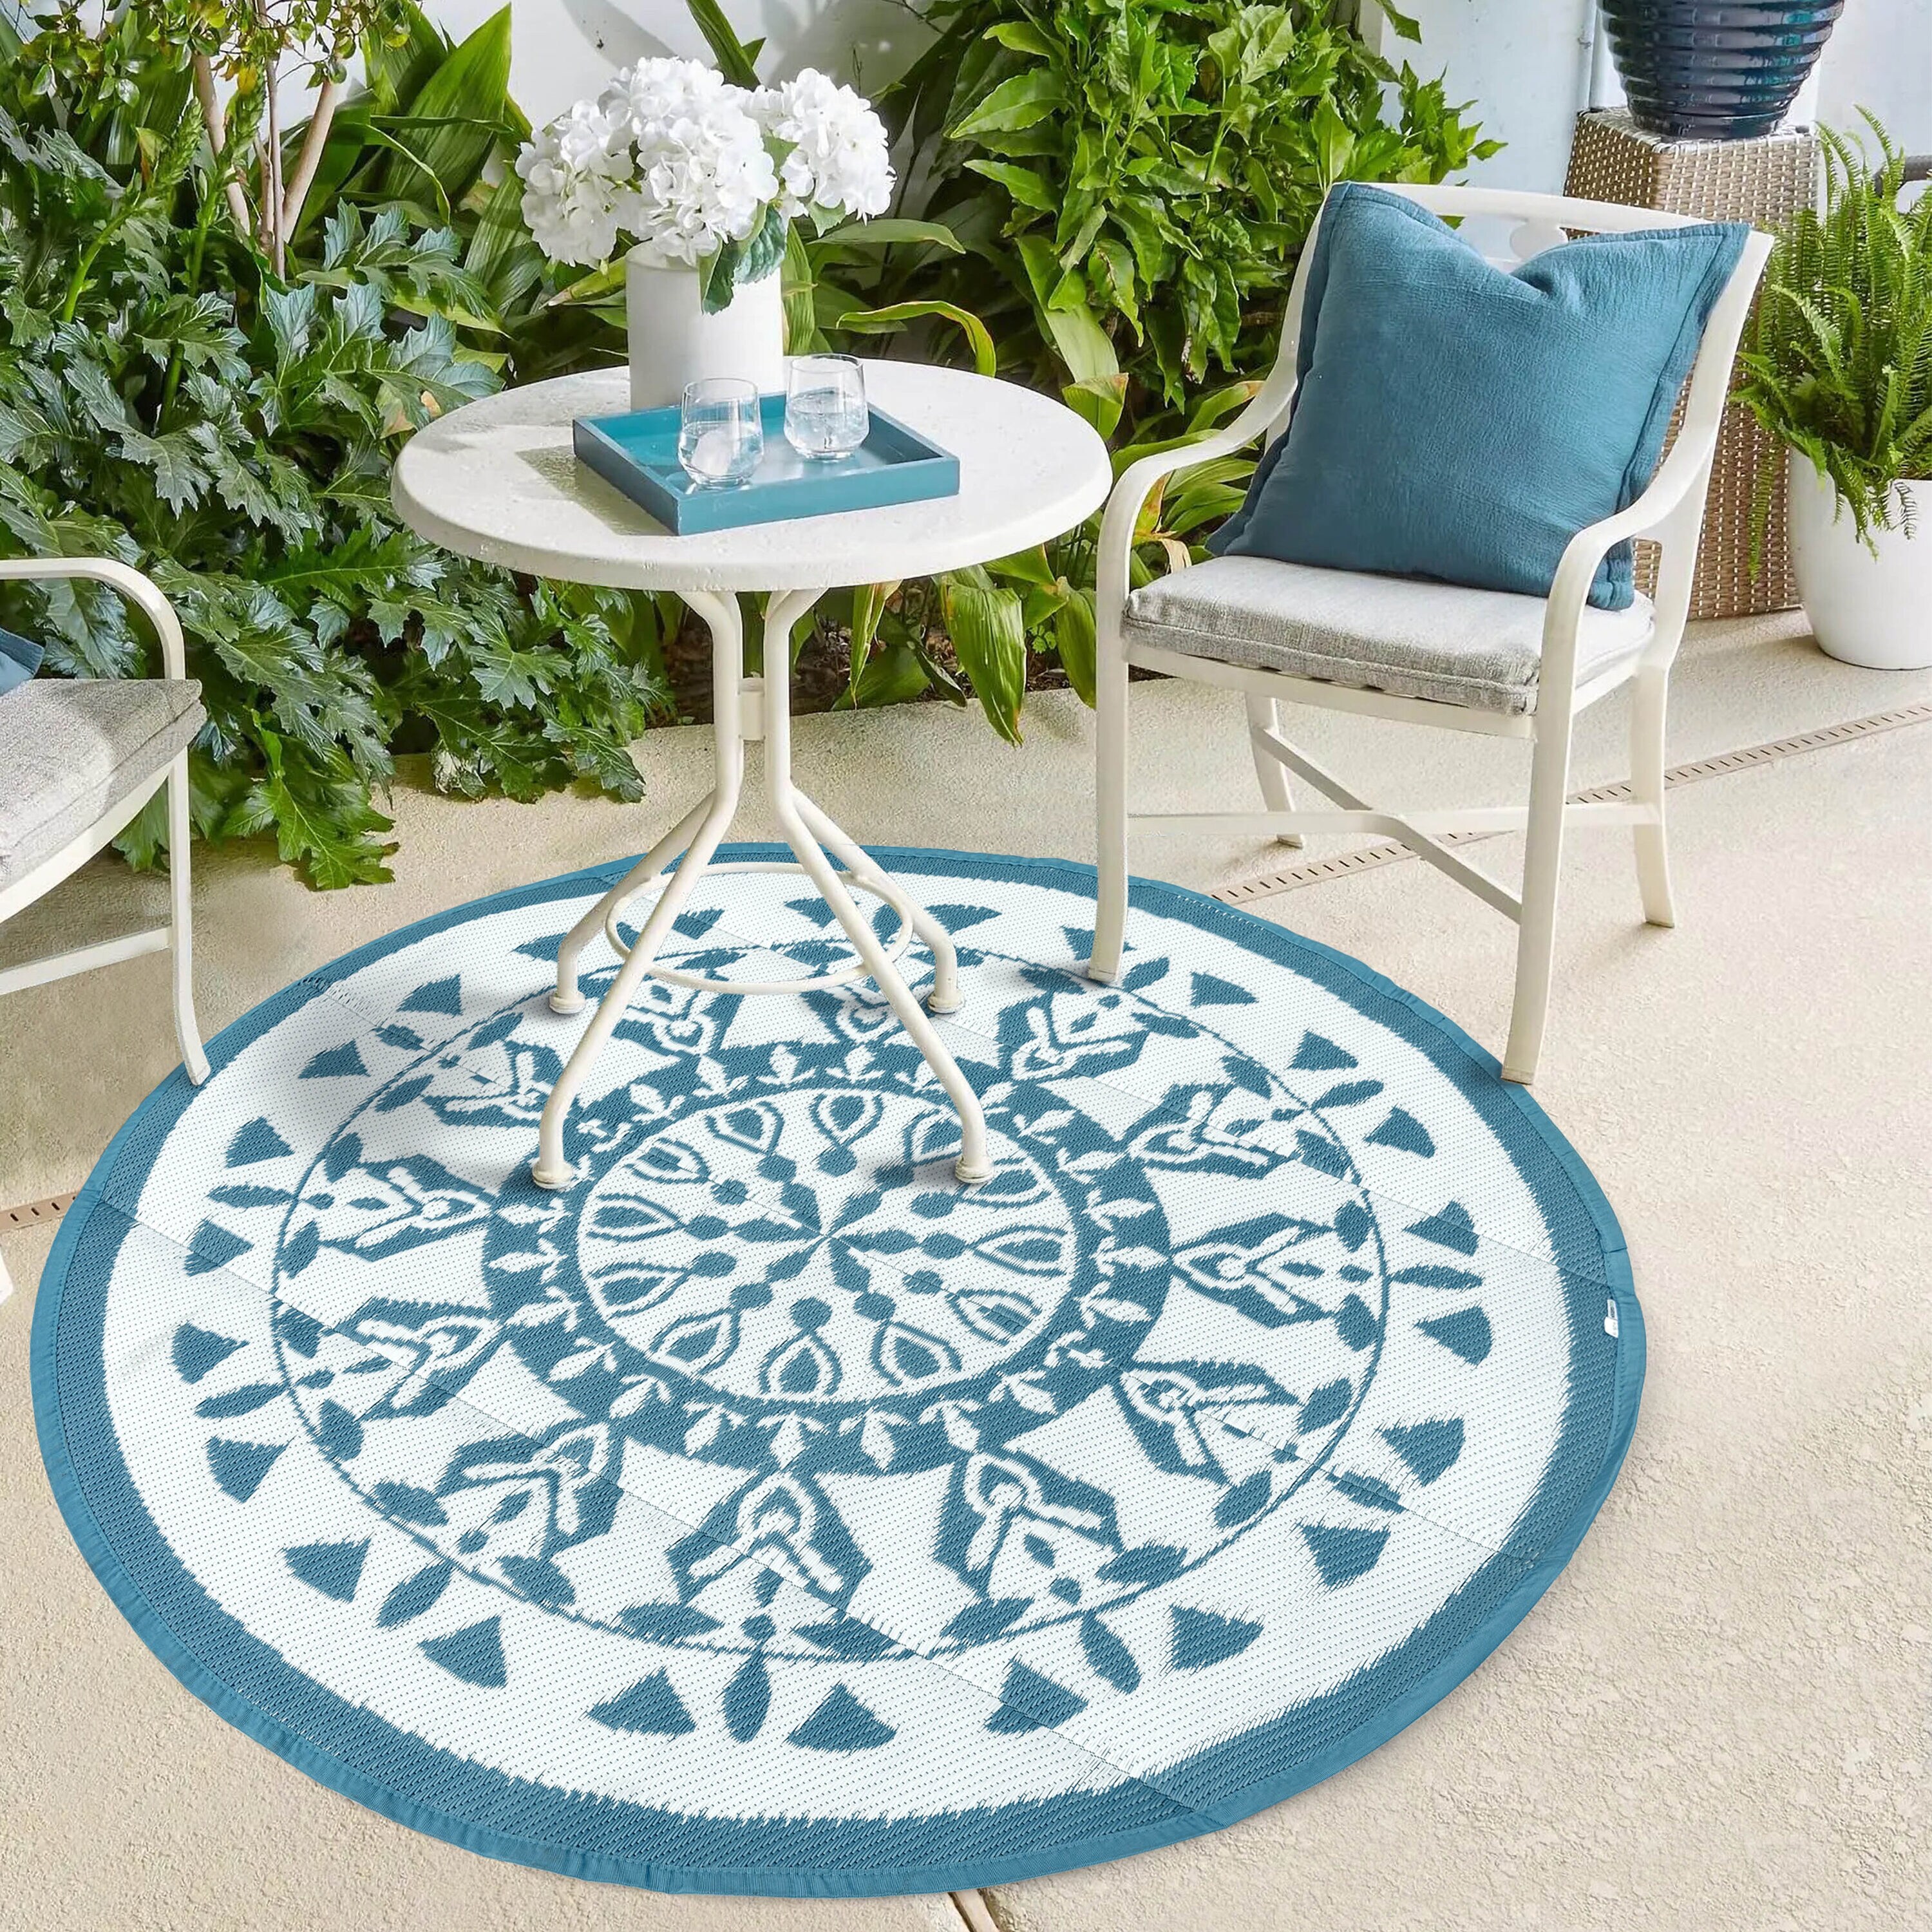 Nuu Garden Blue and White 5 ft. x 7 ft. Rectangle Plastic Moroccan  Waterproof Fade Resistant Indoor/Outdoor Area Rug SO05-01 - The Home Depot